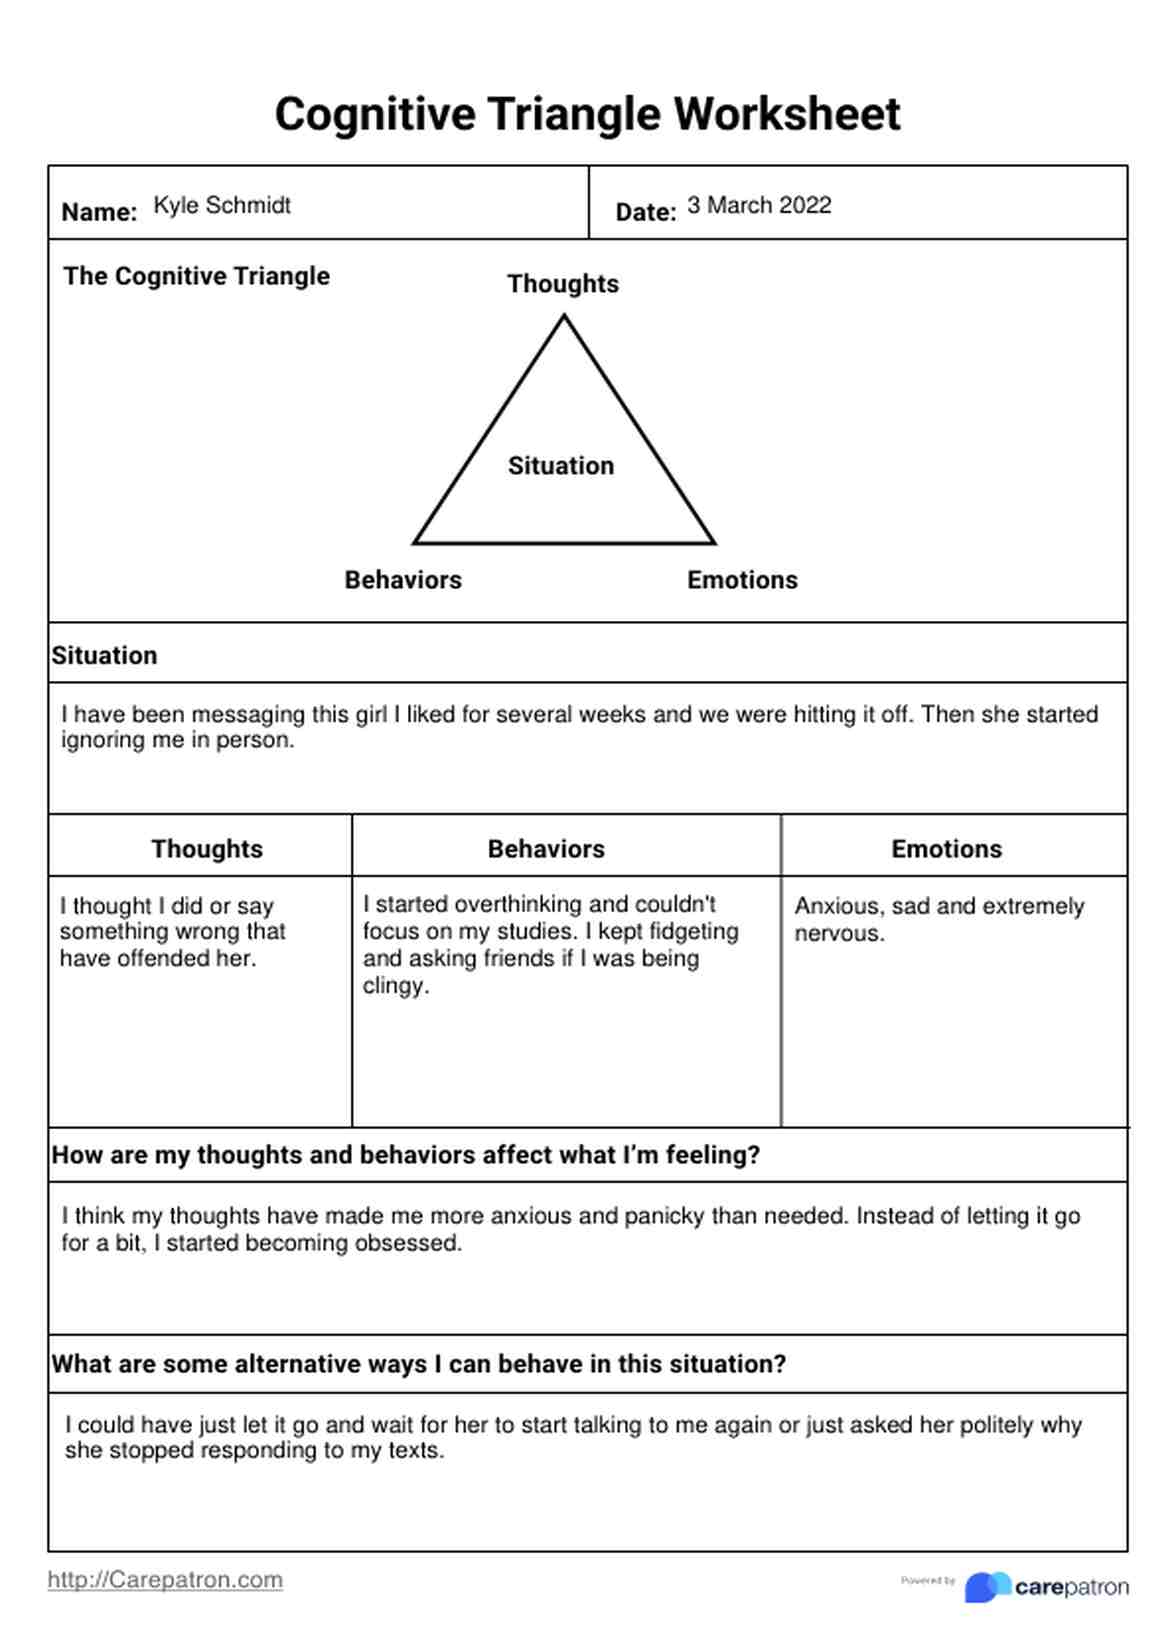 Cognitive Triangle Worksheet PDF Example